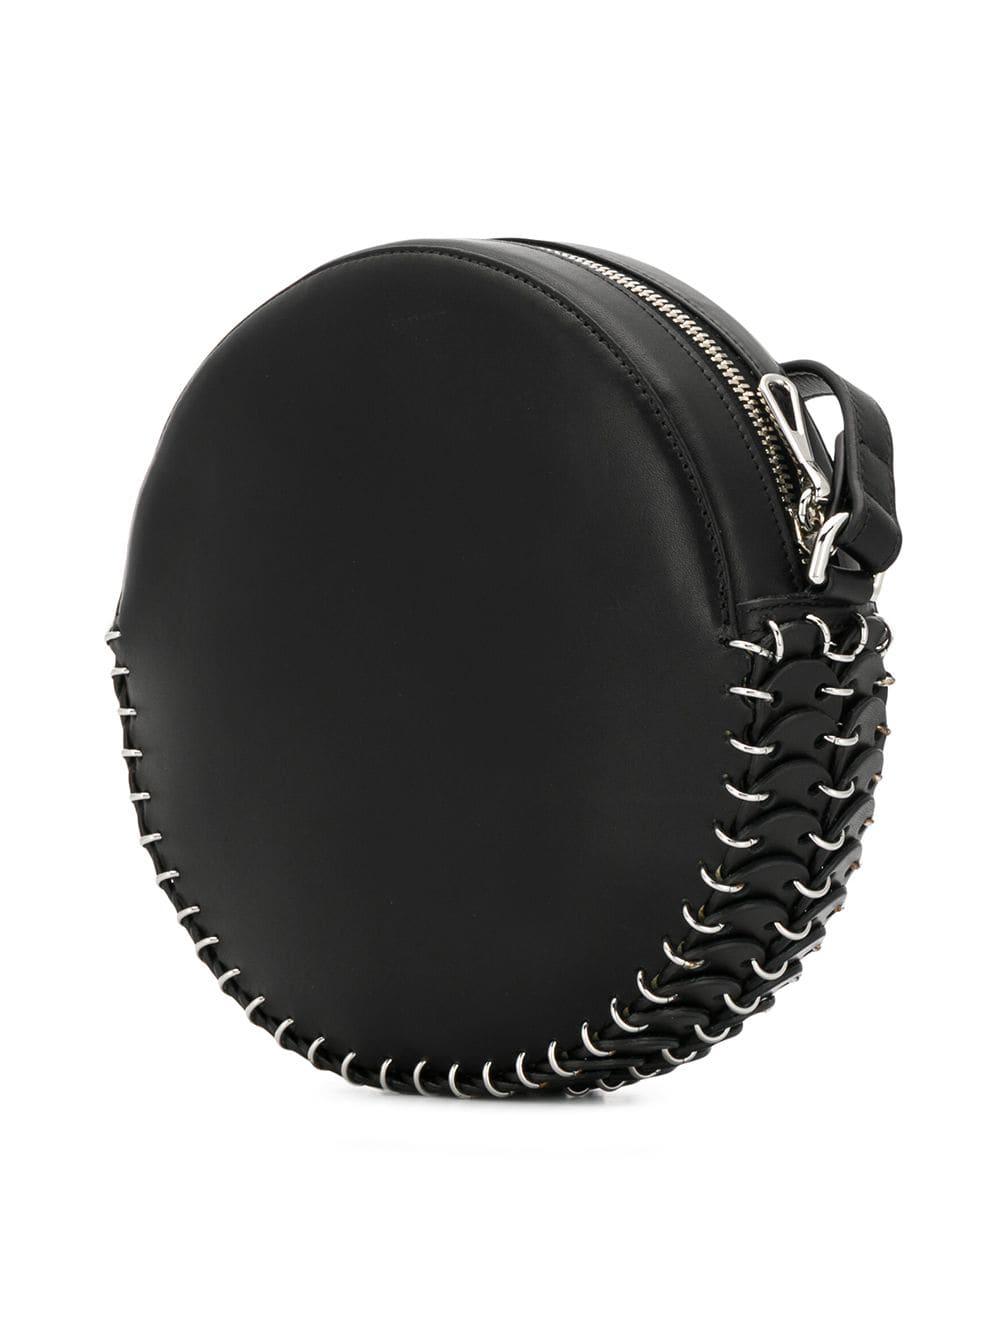 Paco Rabanne Leather Round Shaped Clutch Bag in Black - Lyst